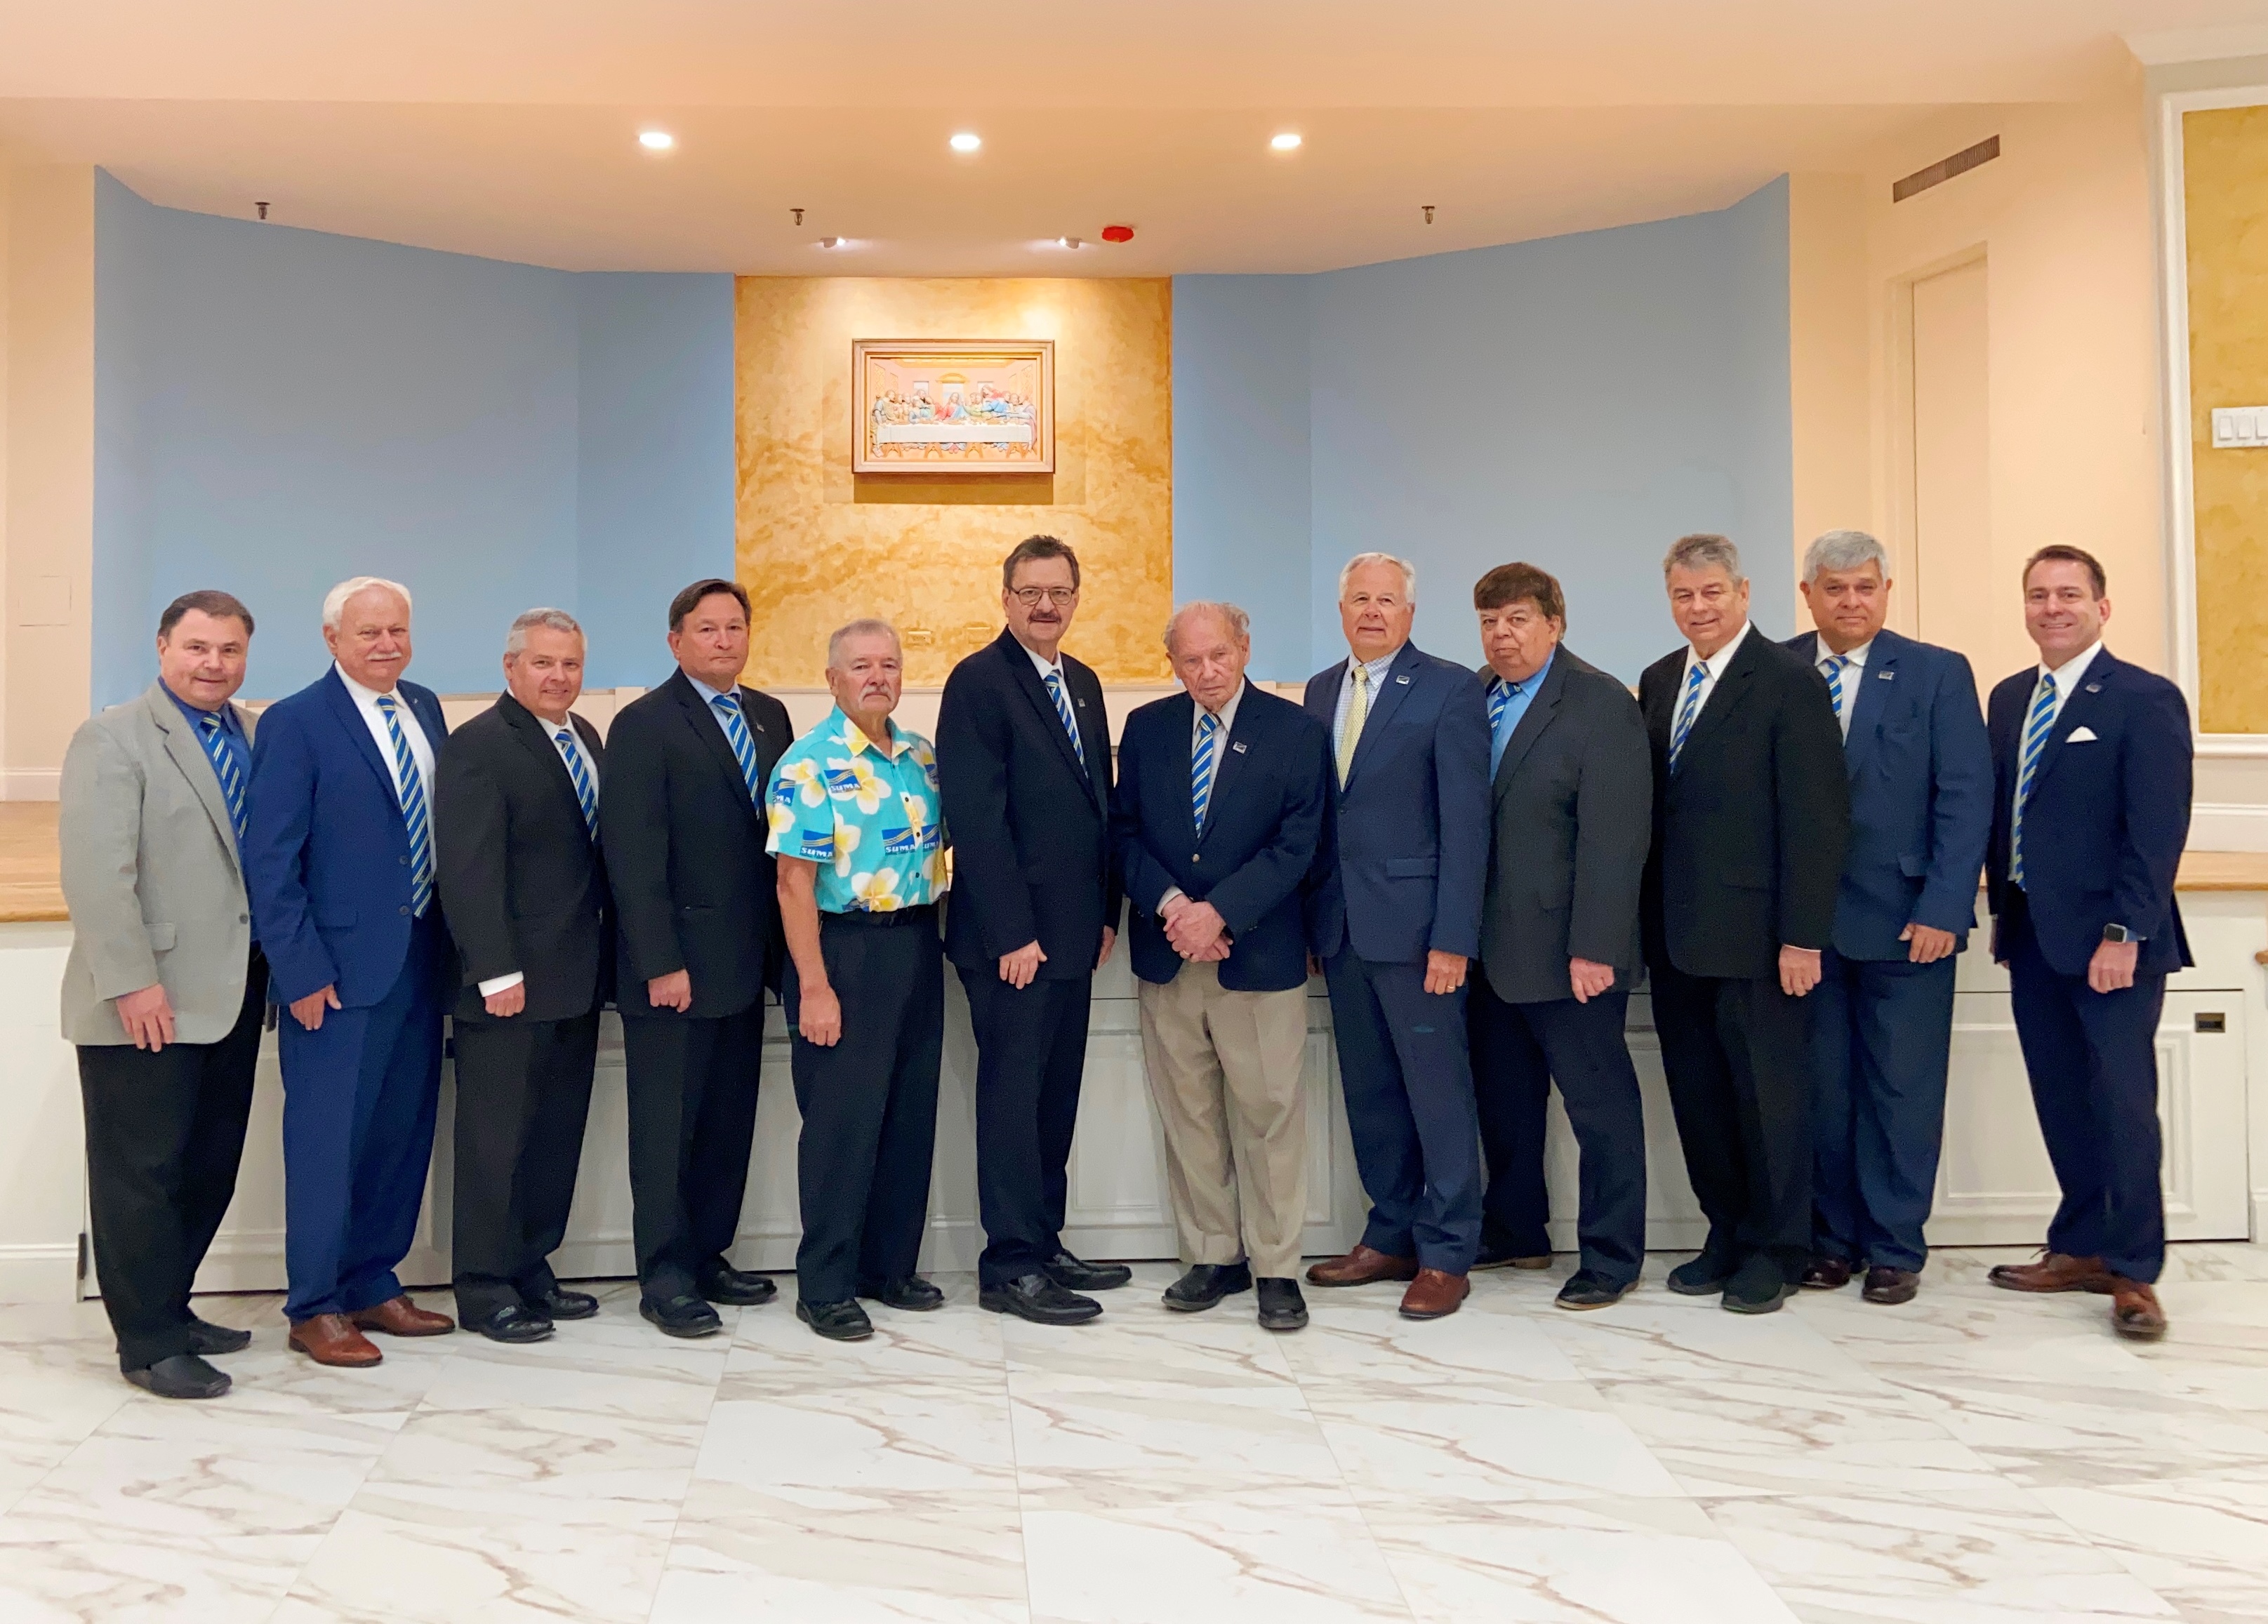 annual meeting - Board of Directors photo